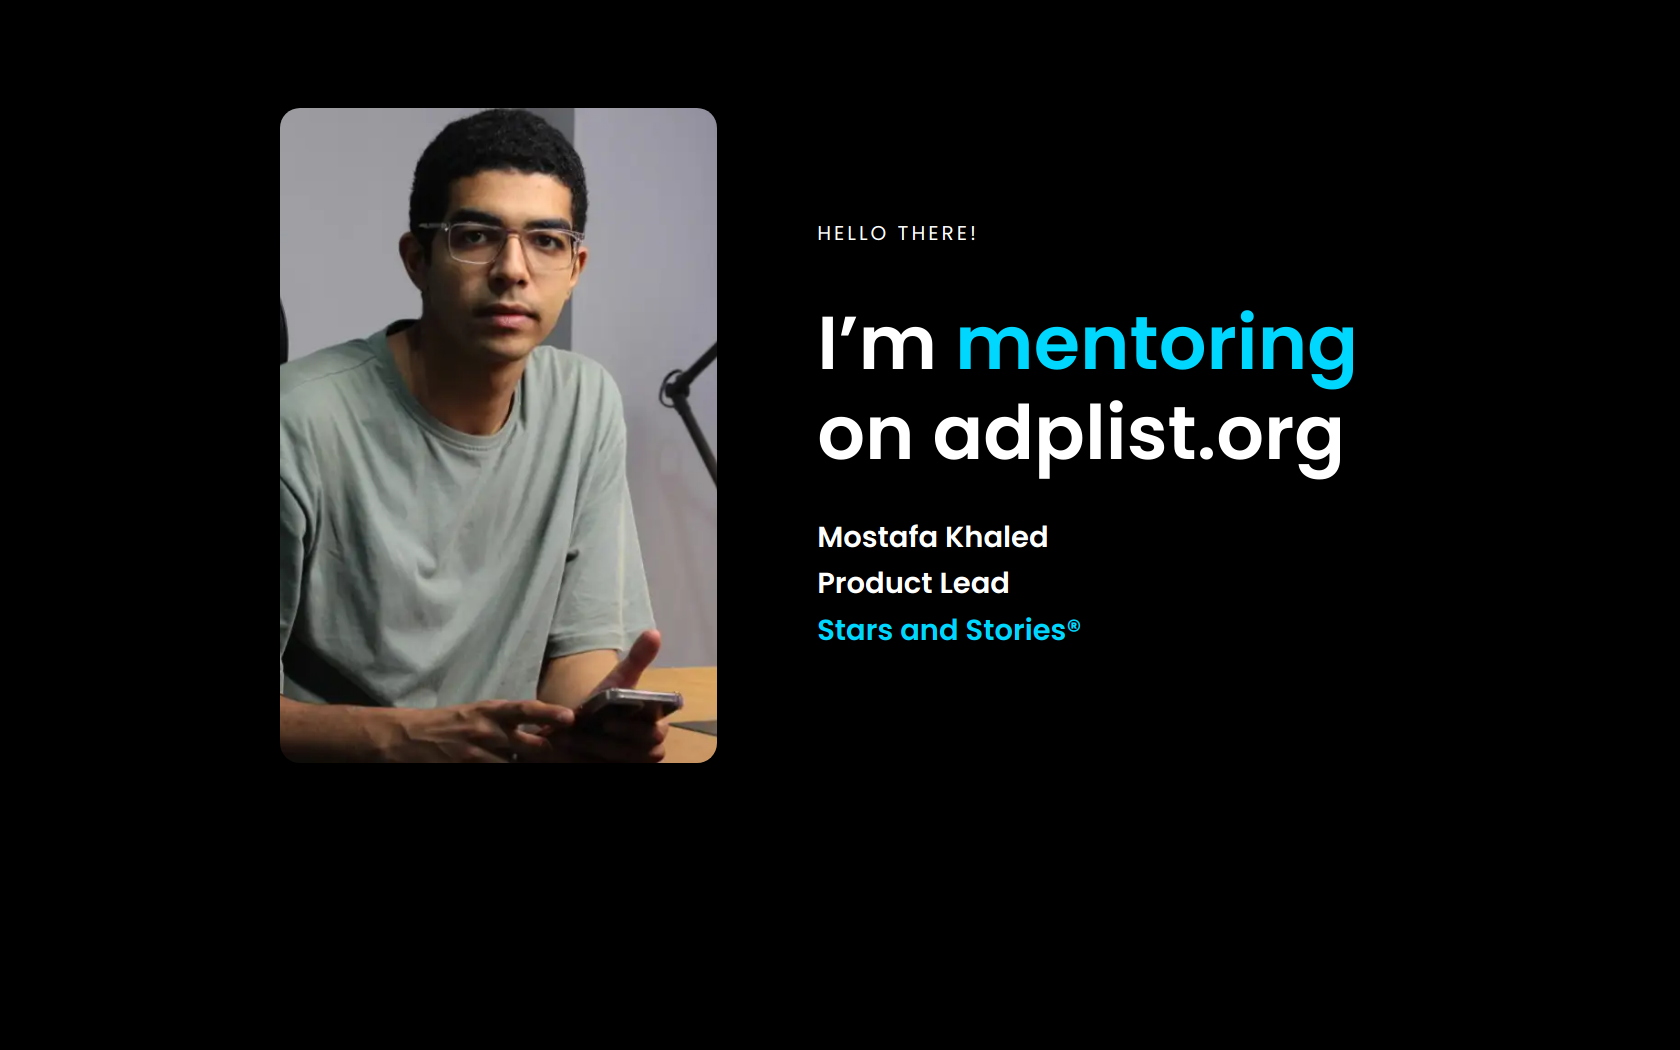 Adplist Product Mentorship with Mostafa Khaled LinkedIn Community Top Voice in User Experience (UX)